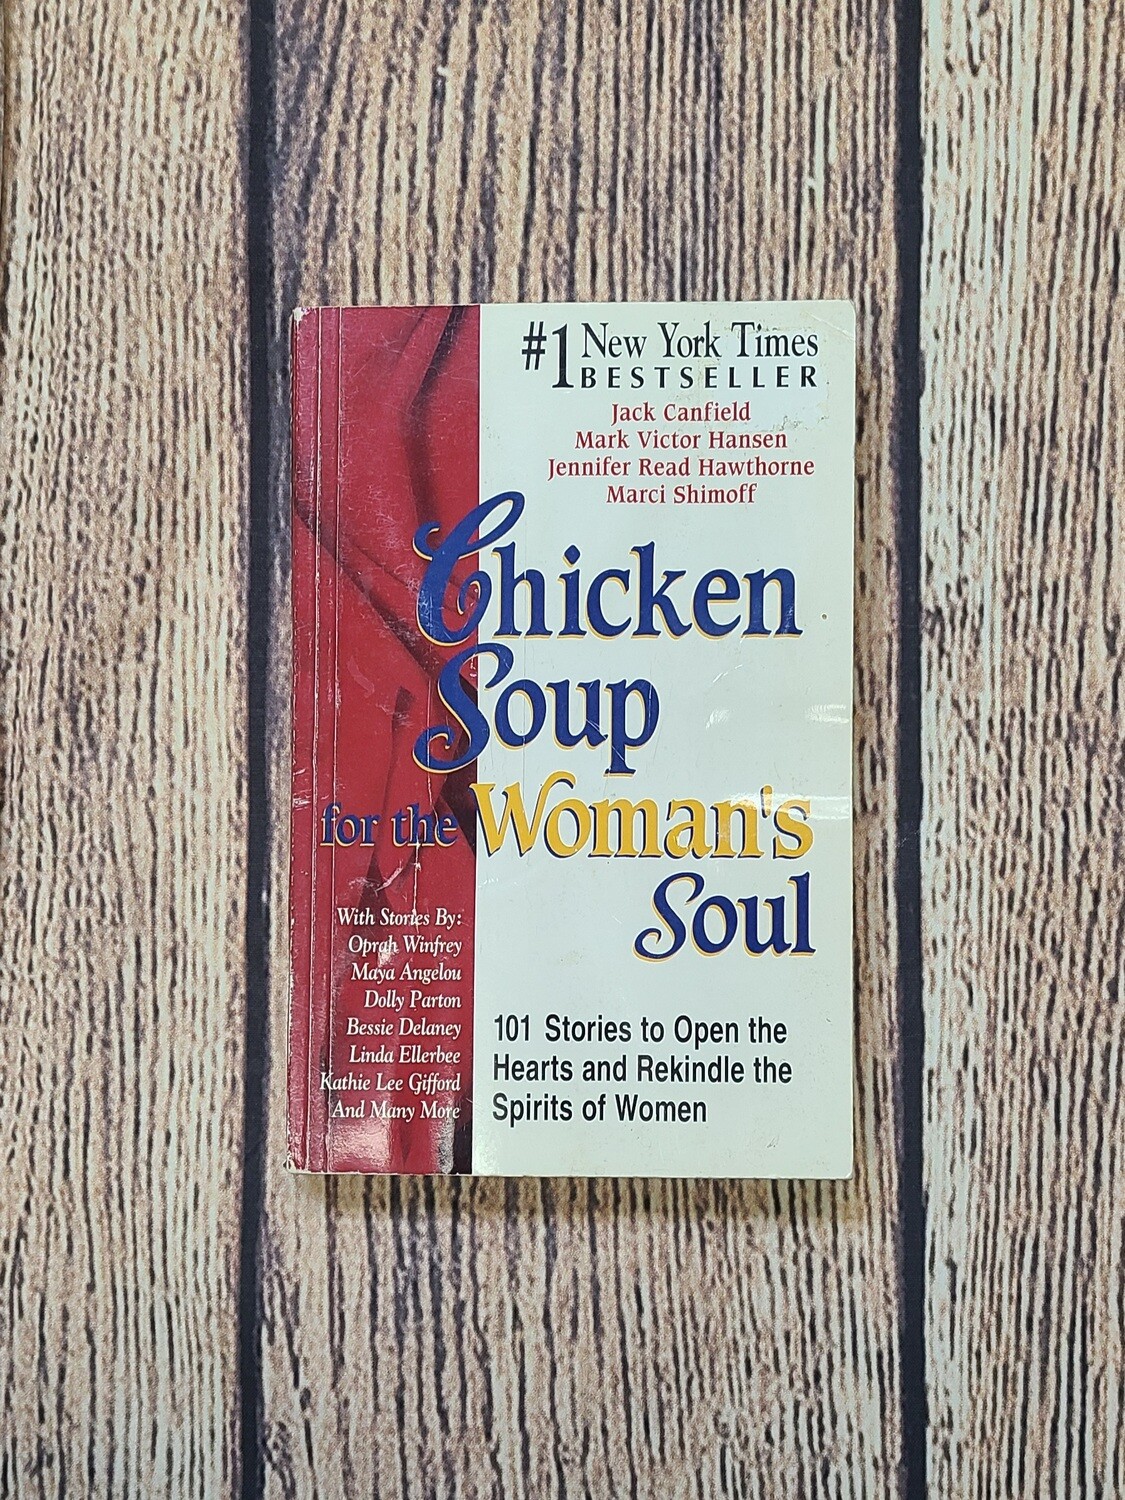 Chicken Soup for the Woman's Soul by Jack Canfield, Mark Victor Hansen, Jennifer Read Hawthorne, and Marci Shimoff